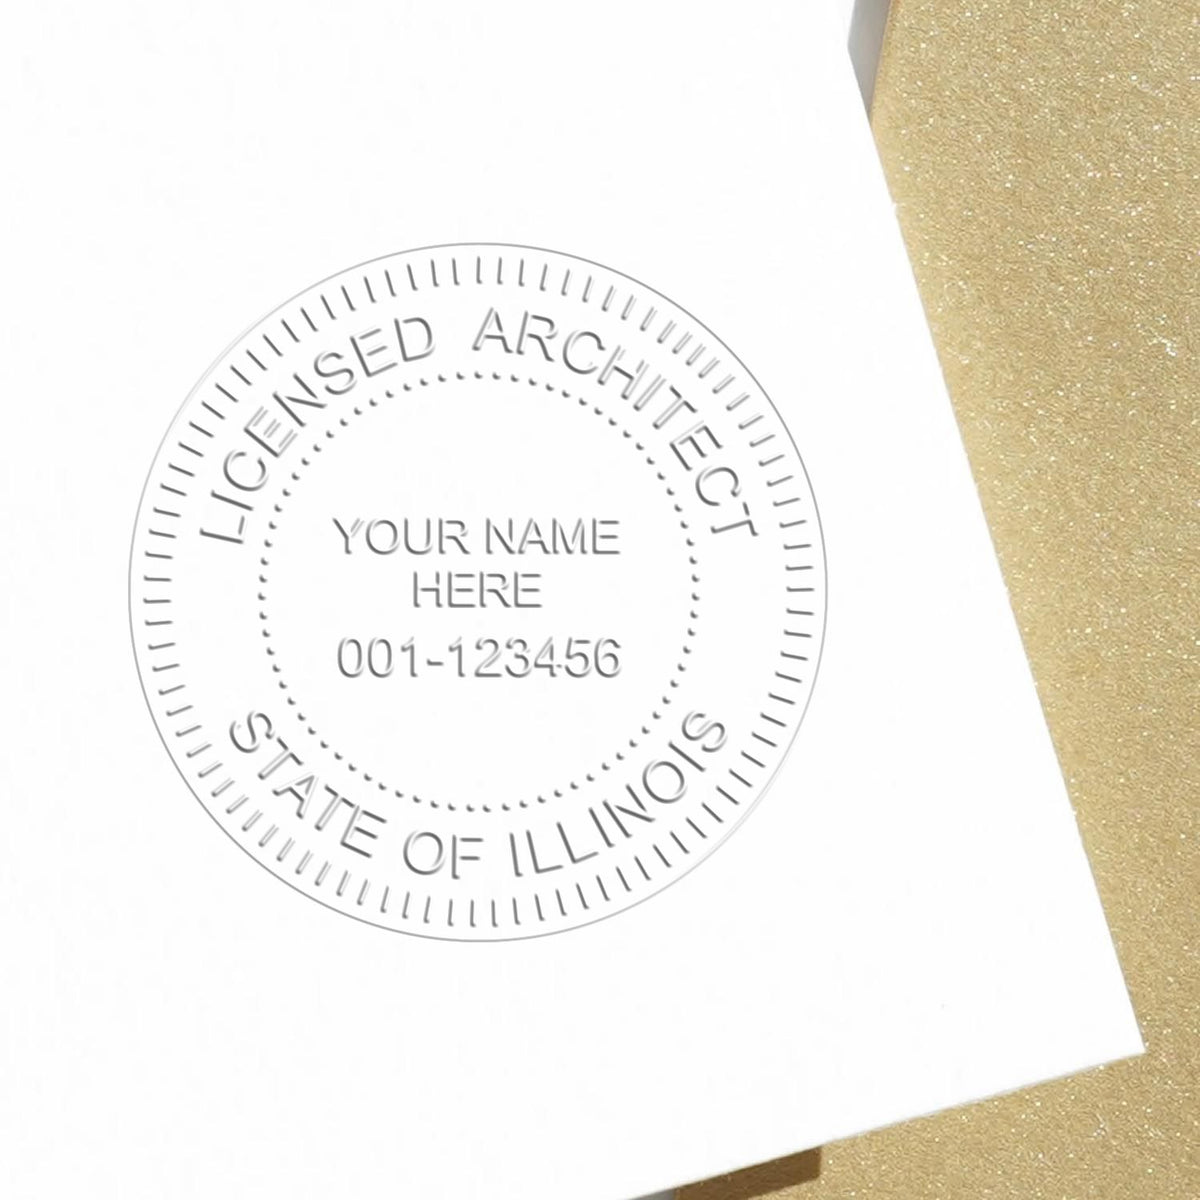 A stamped impression of the State of Illinois Architectural Seal Embosser in this stylish lifestyle photo, setting the tone for a unique and personalized product.